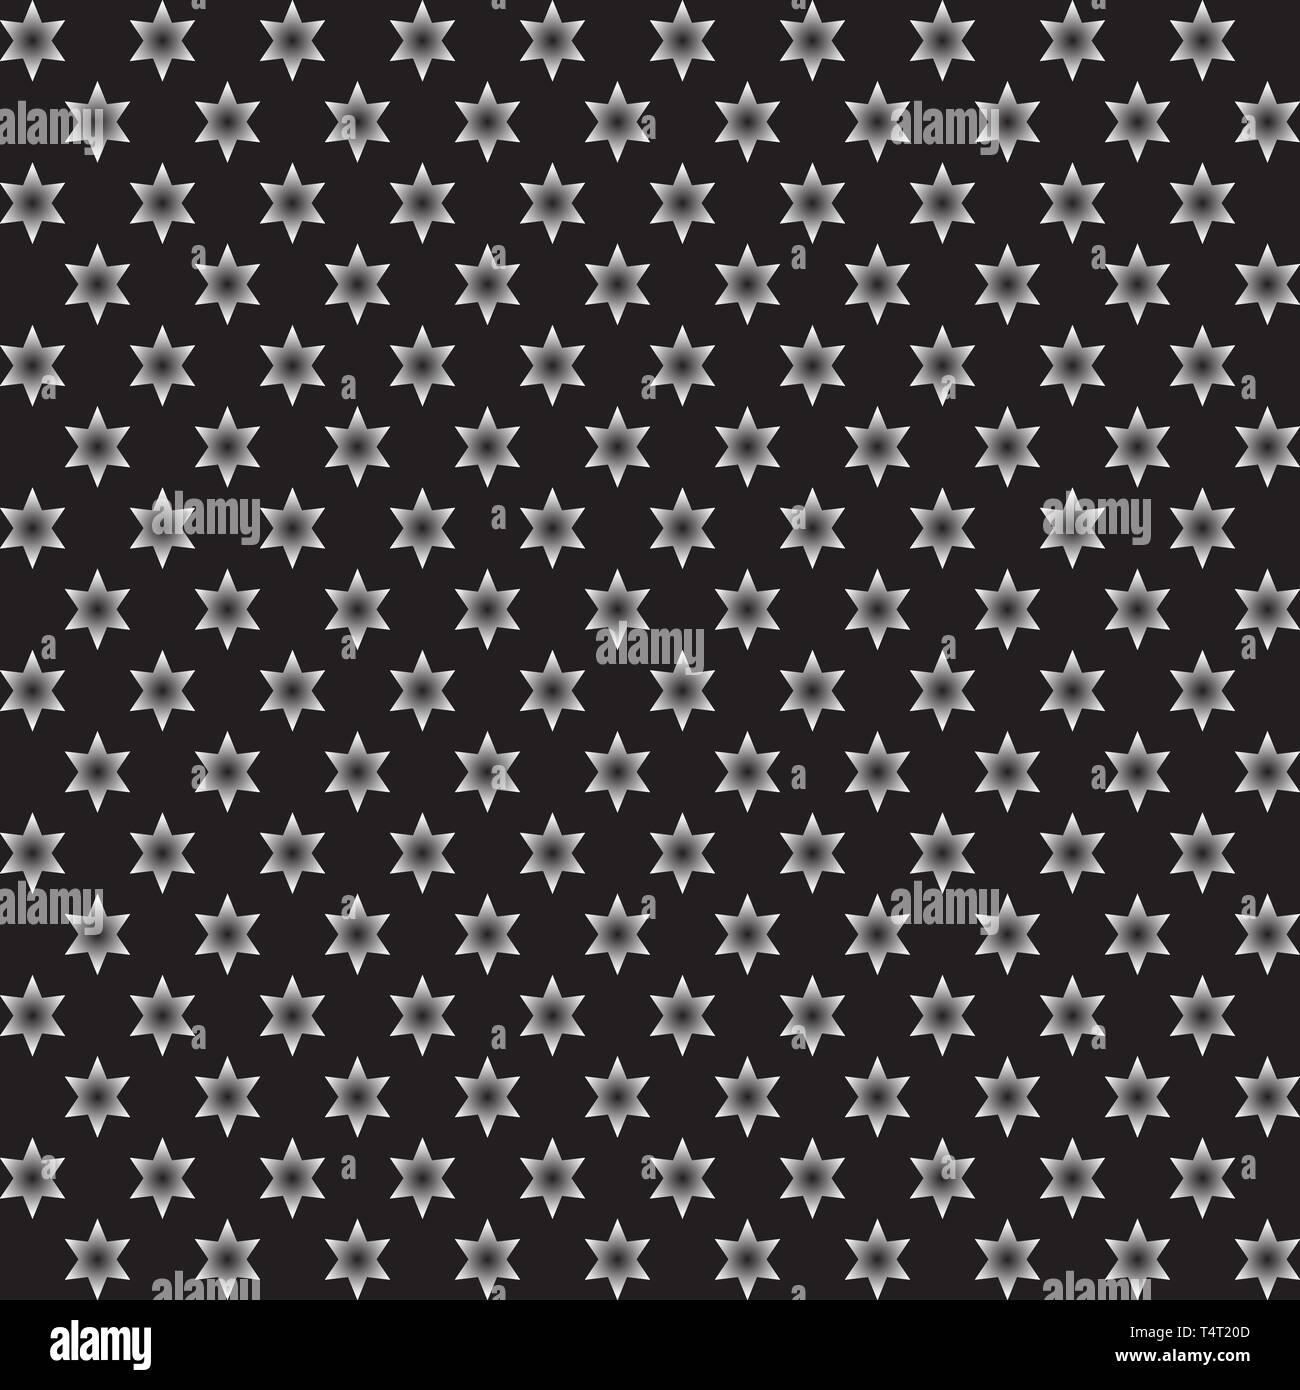 Seamless pattern wrapping paper design template Vector Image